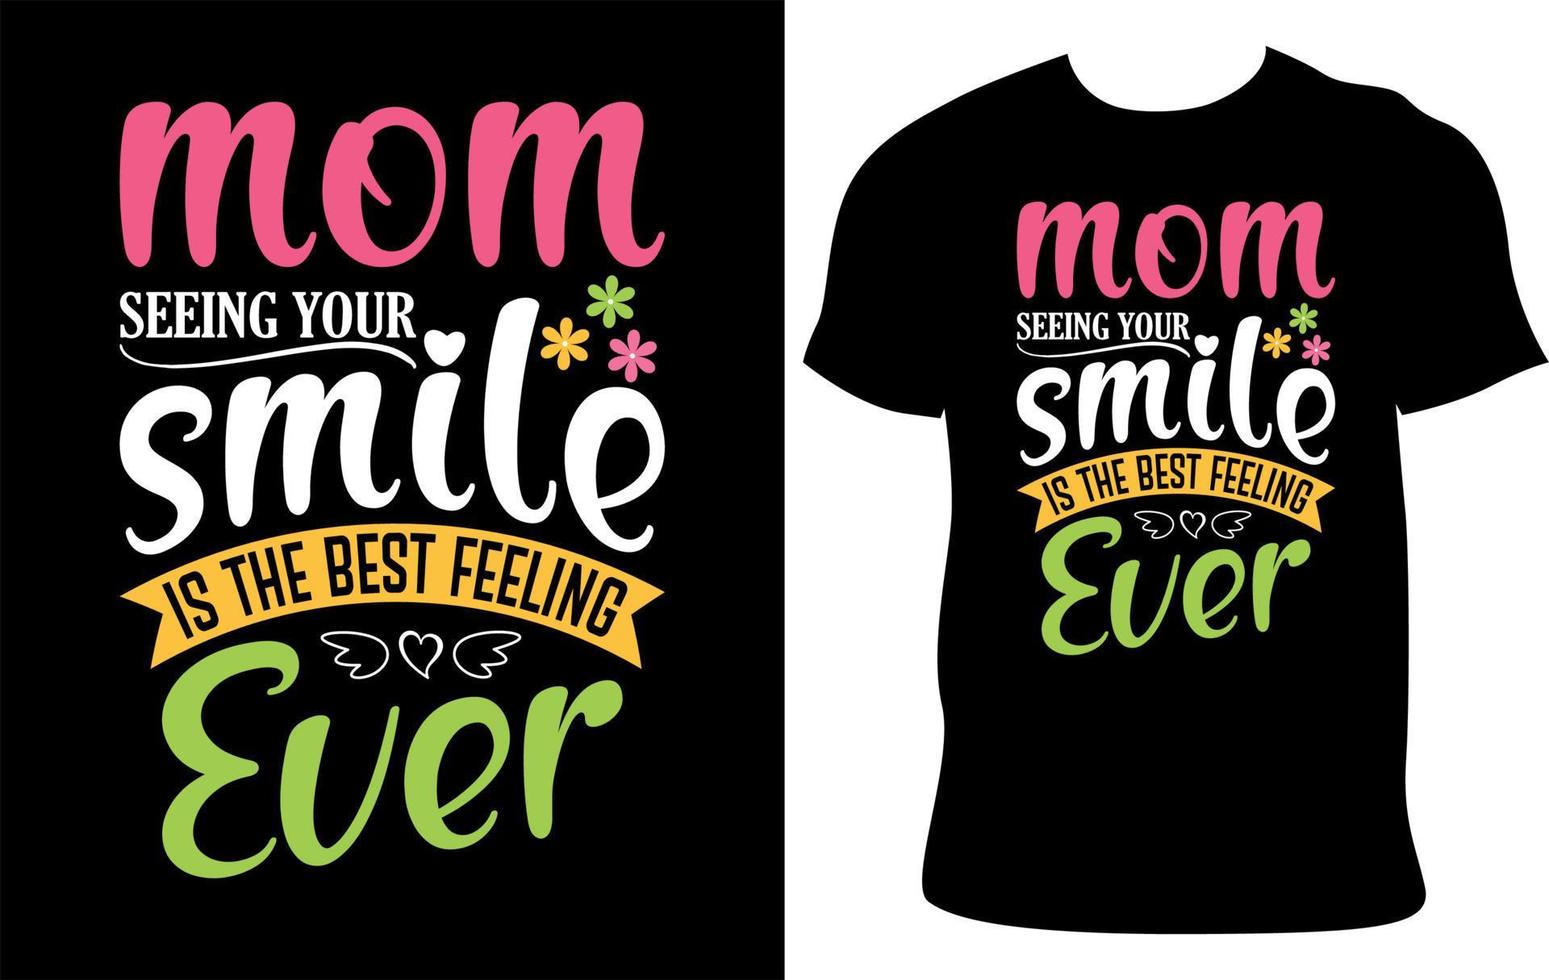 Mom Seeing Your Smile Is The Best Feeling Ever- Mother's Day Typography T-Shirt Design. vector